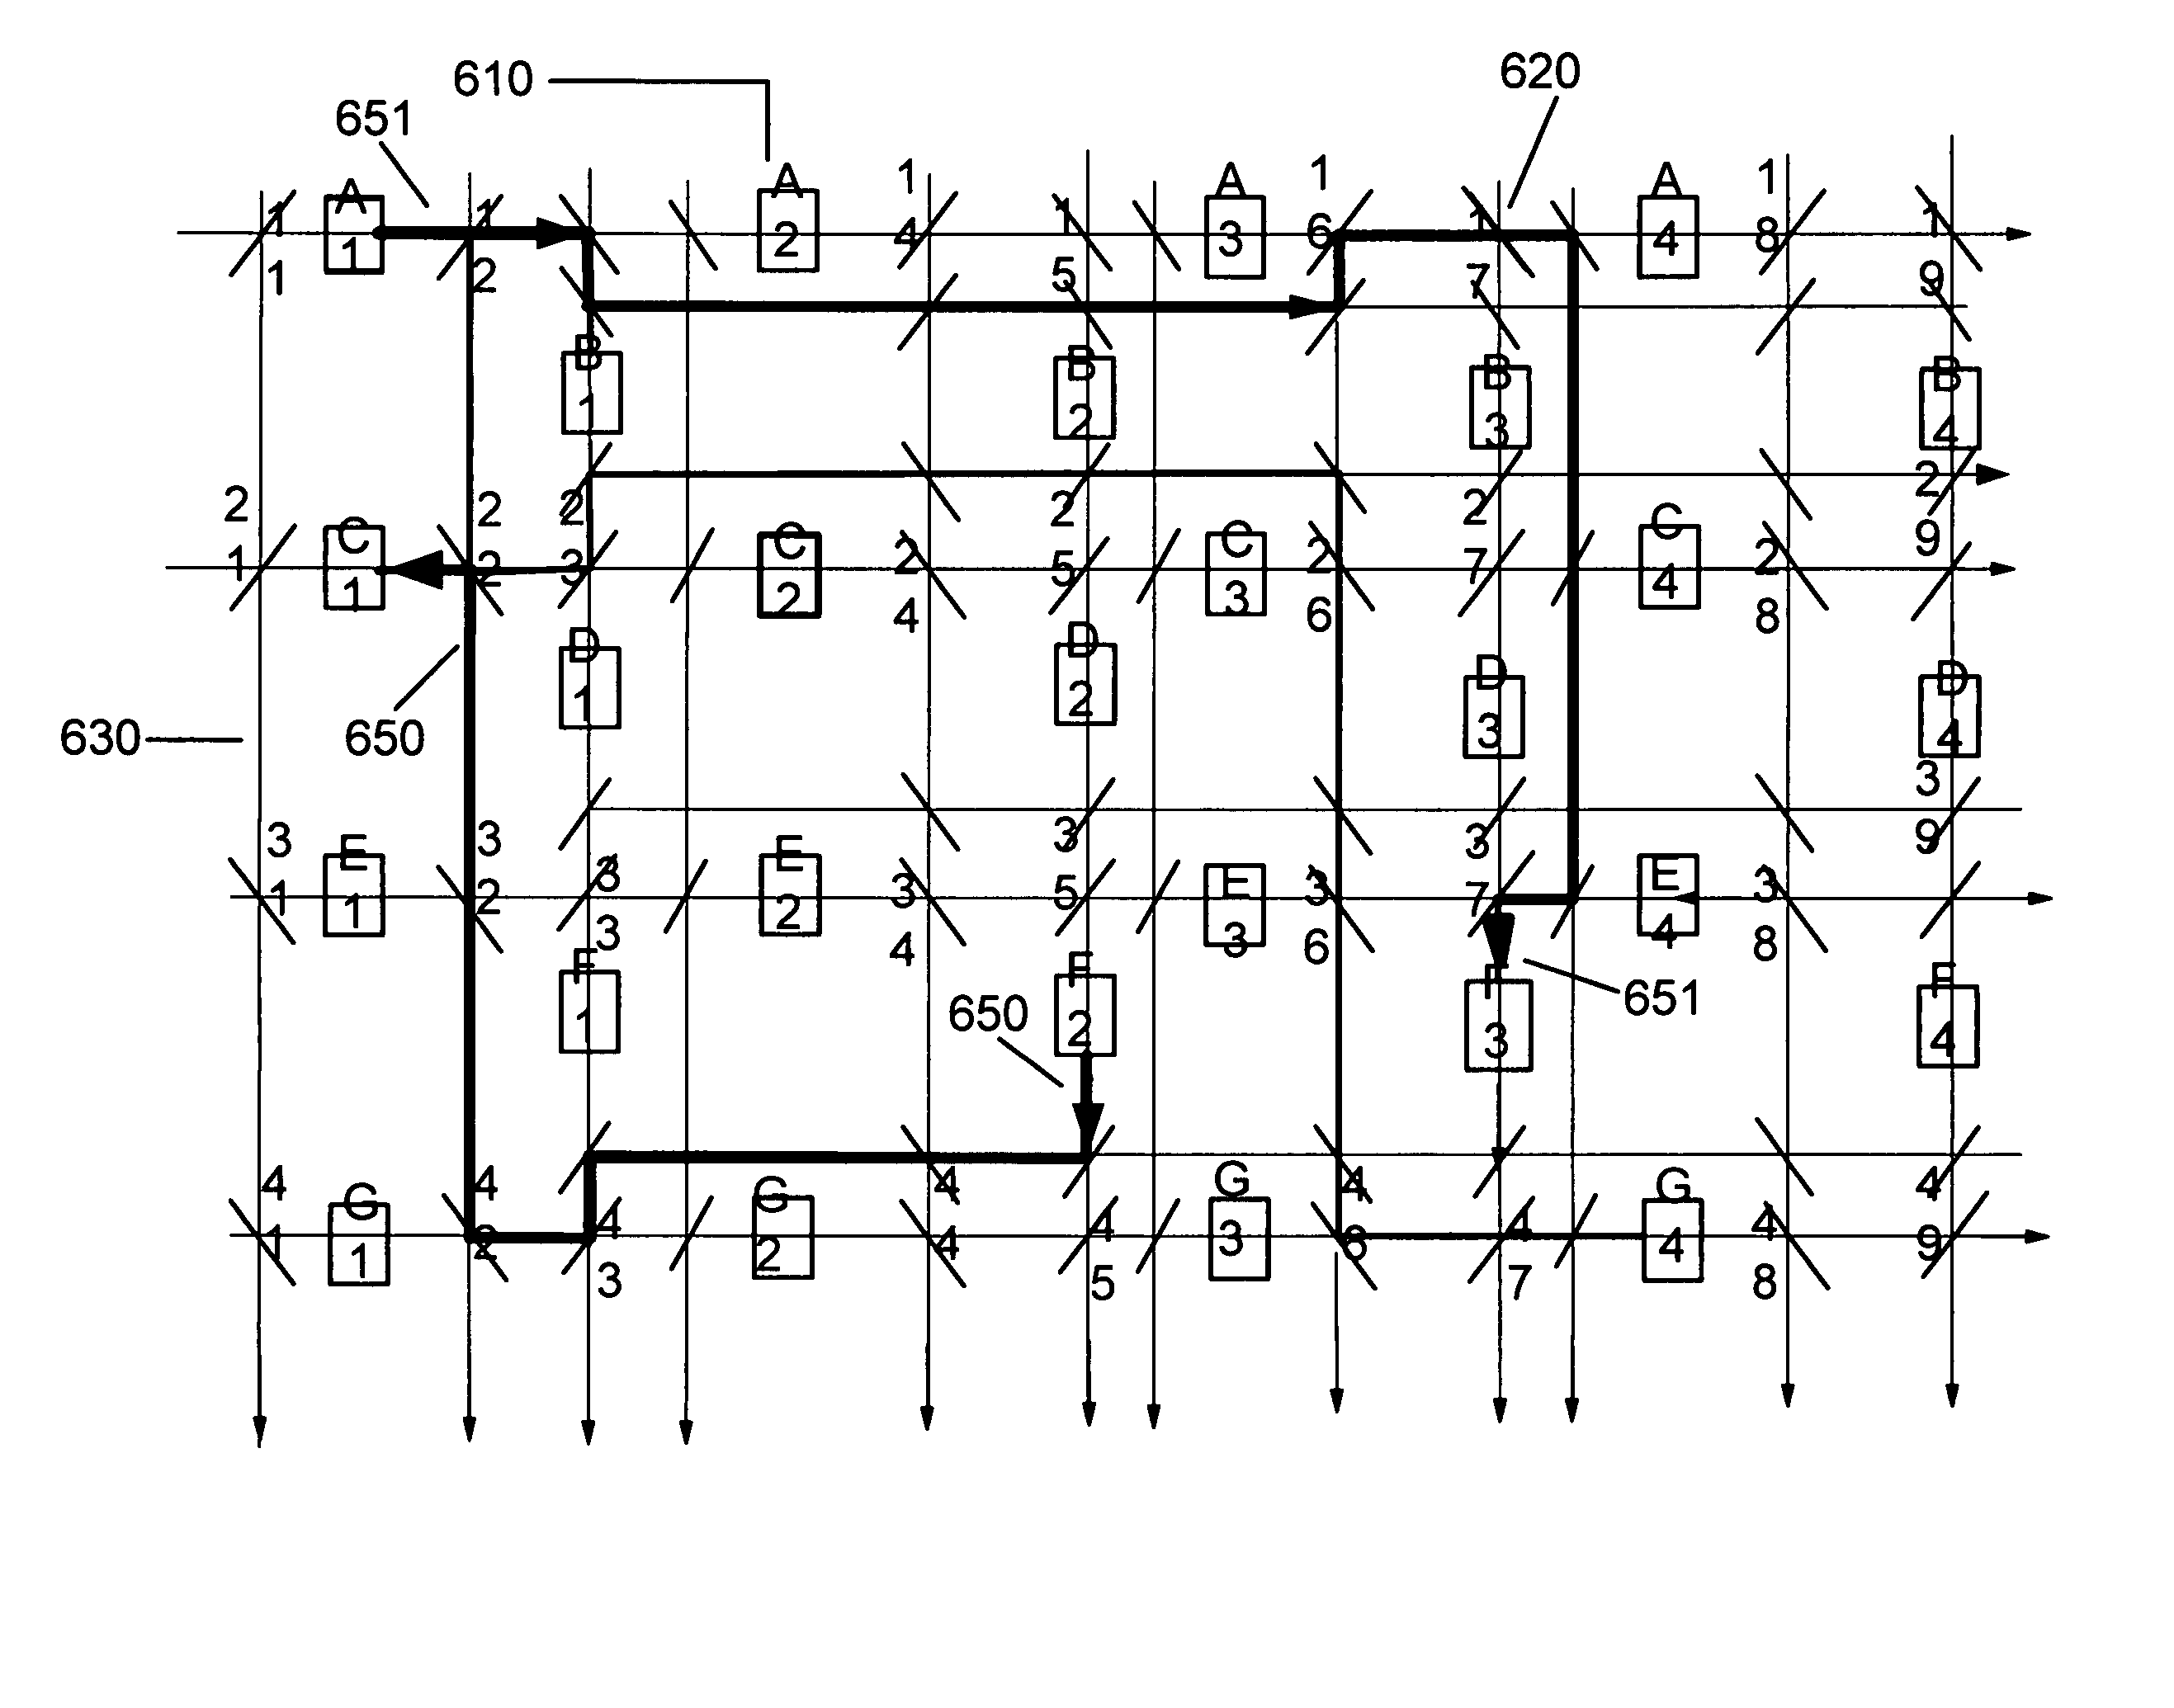 Magneto-optical switching backplane for processor interconnection